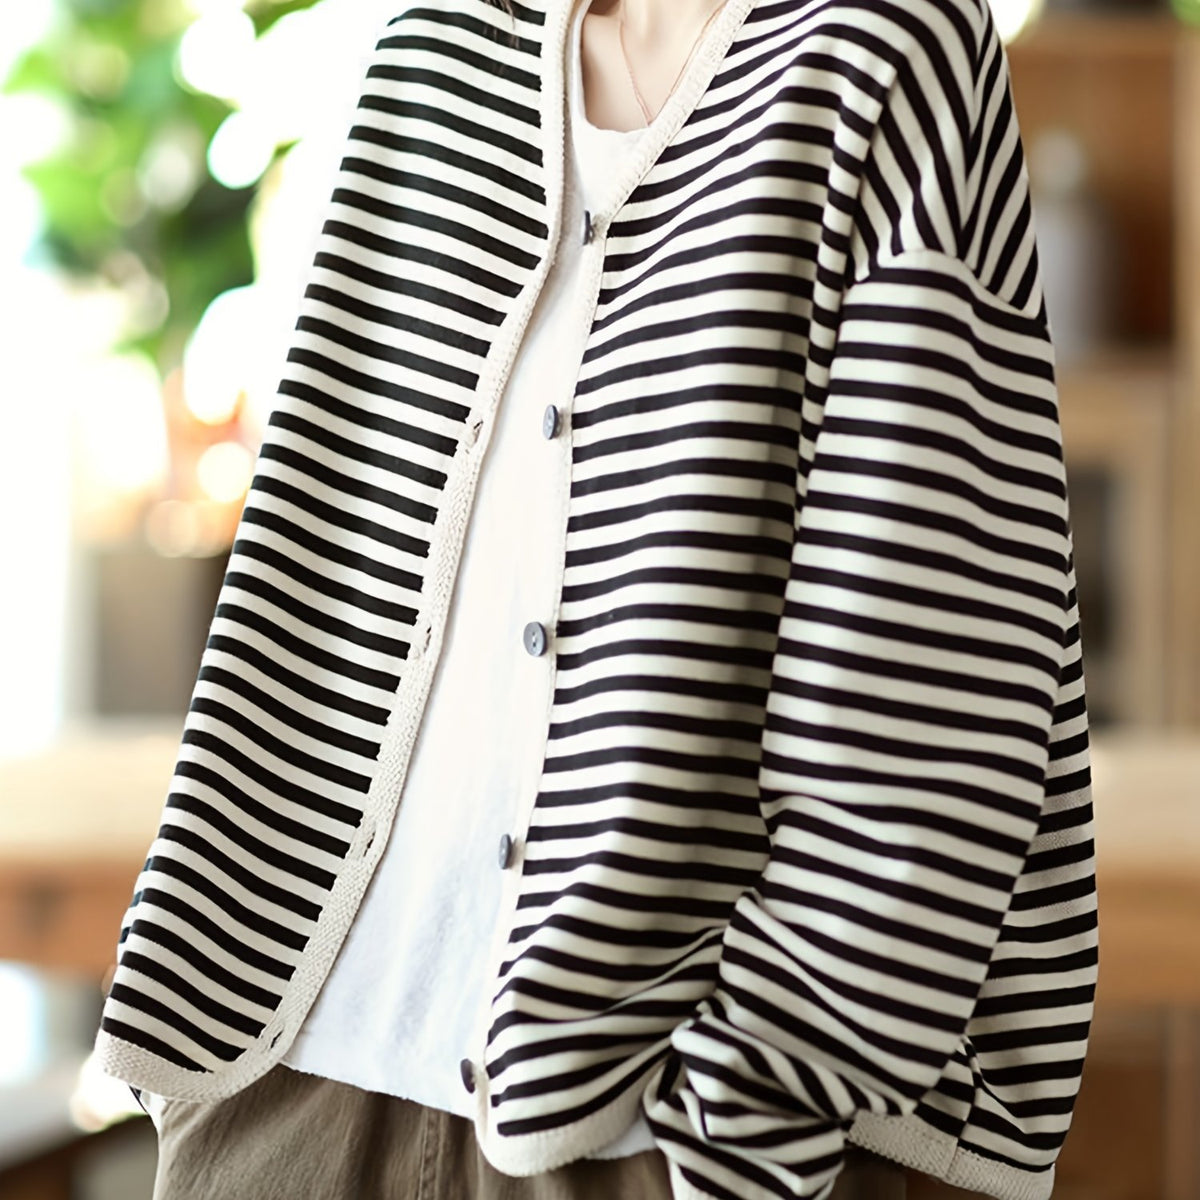 vlovelaw  Striped Print Button Front Jacket, Casual V Neck Long Sleeve Outerwear For Spring & Summer, Women's Clothing